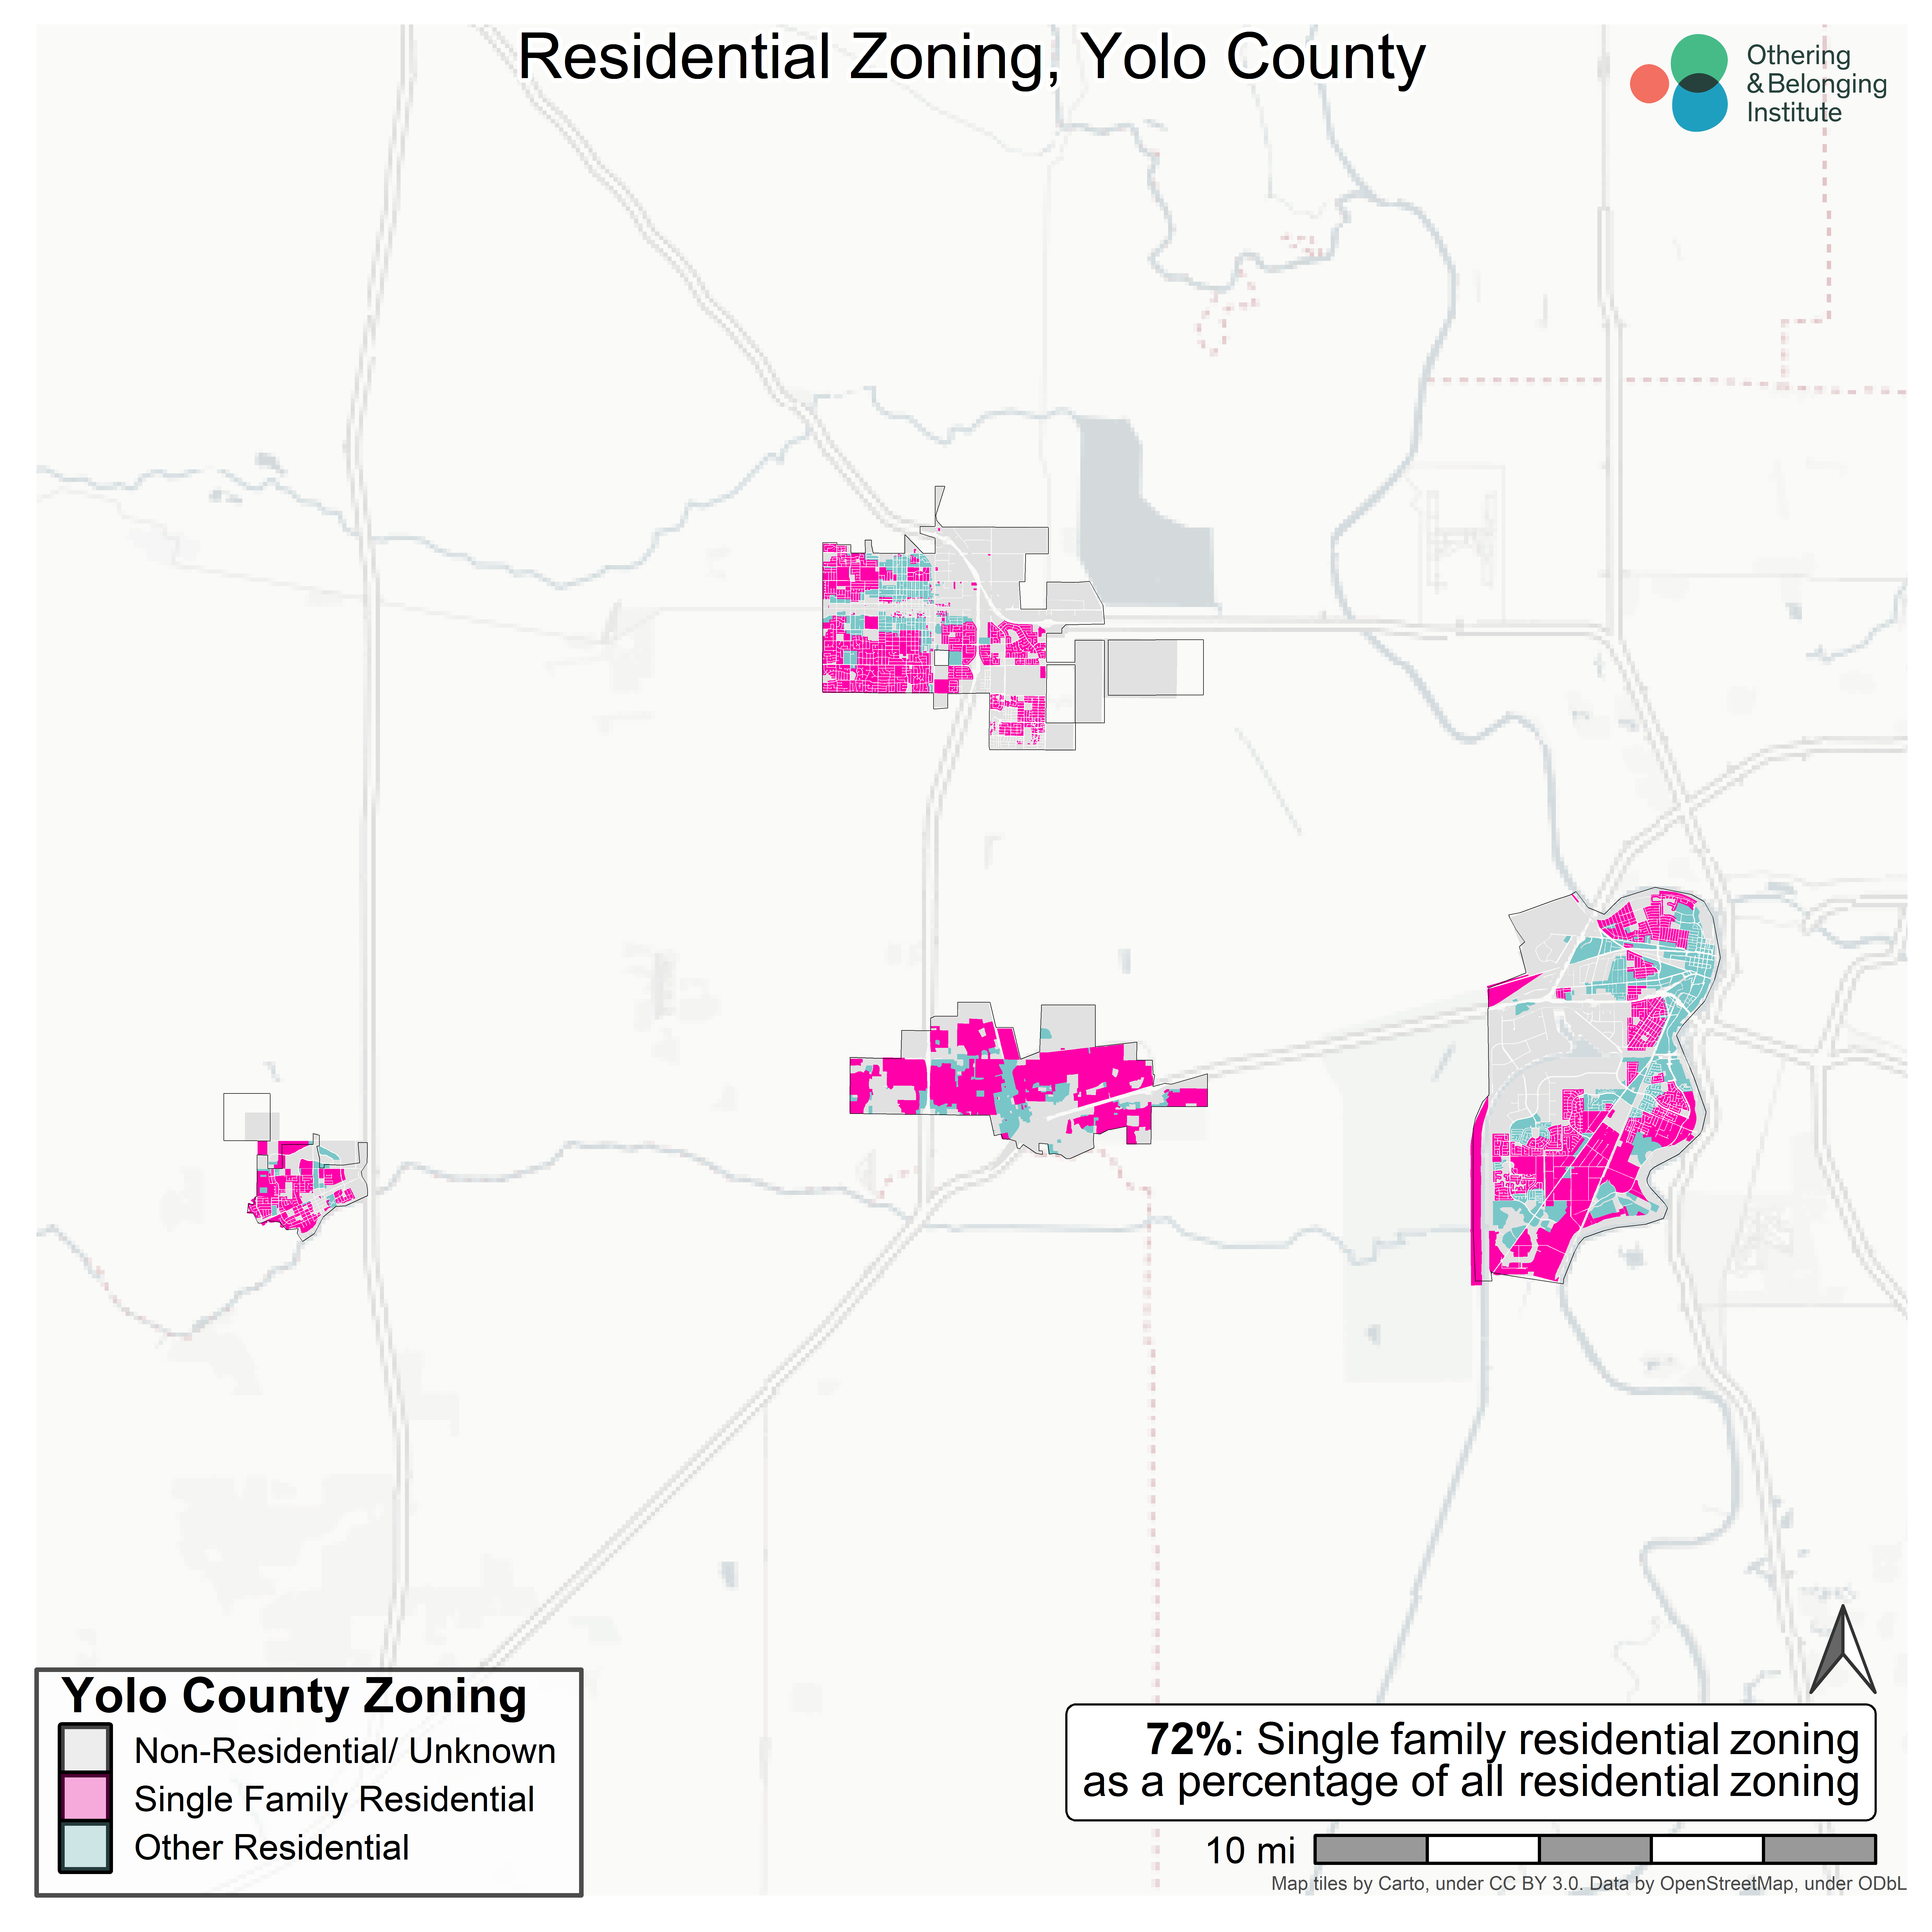 Yolo County zoning map